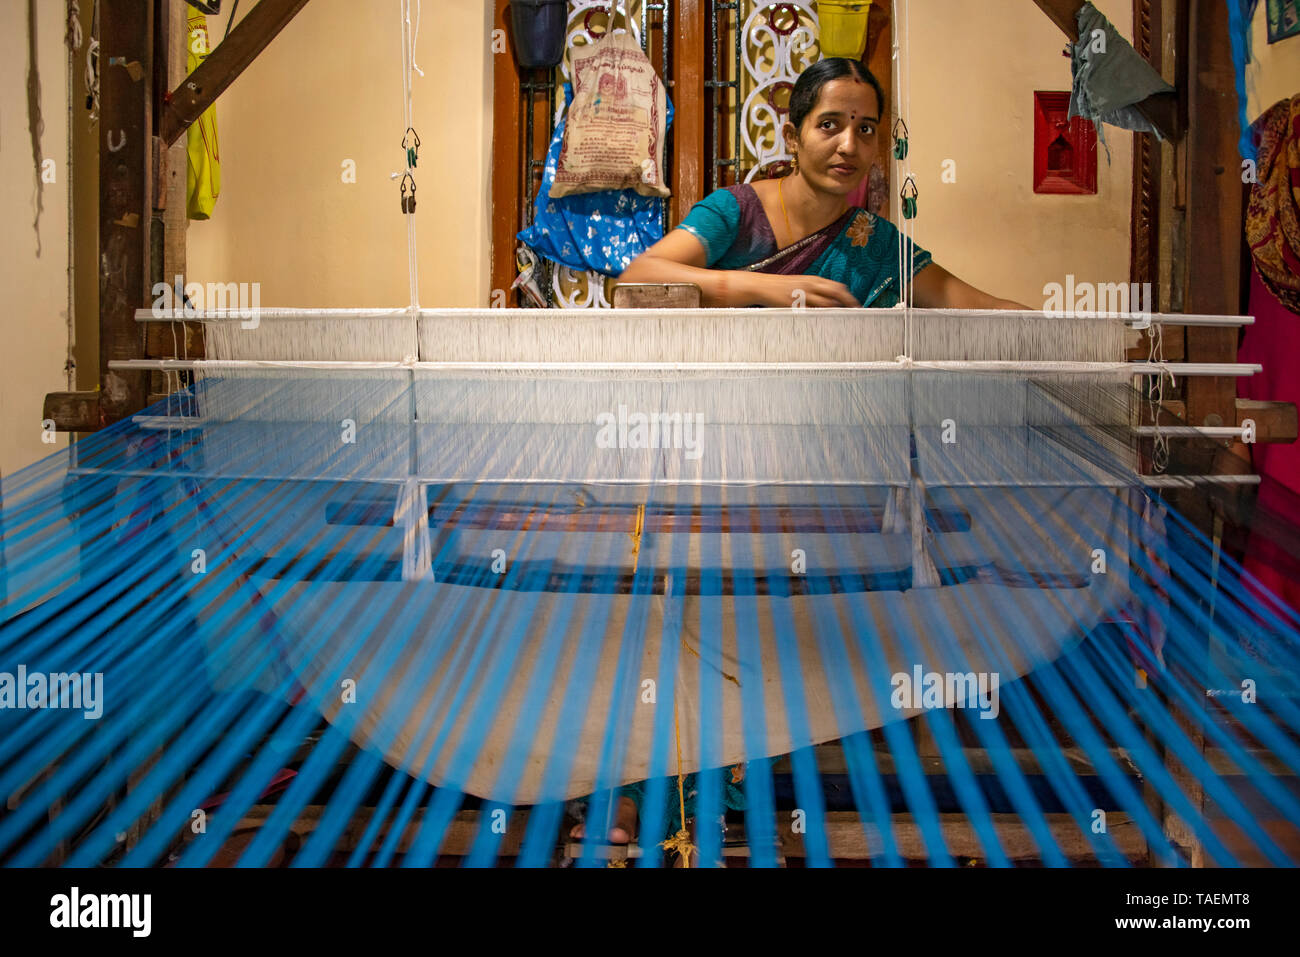 Horizontal portrait of a lady using a floor loom in India. Stock Photo